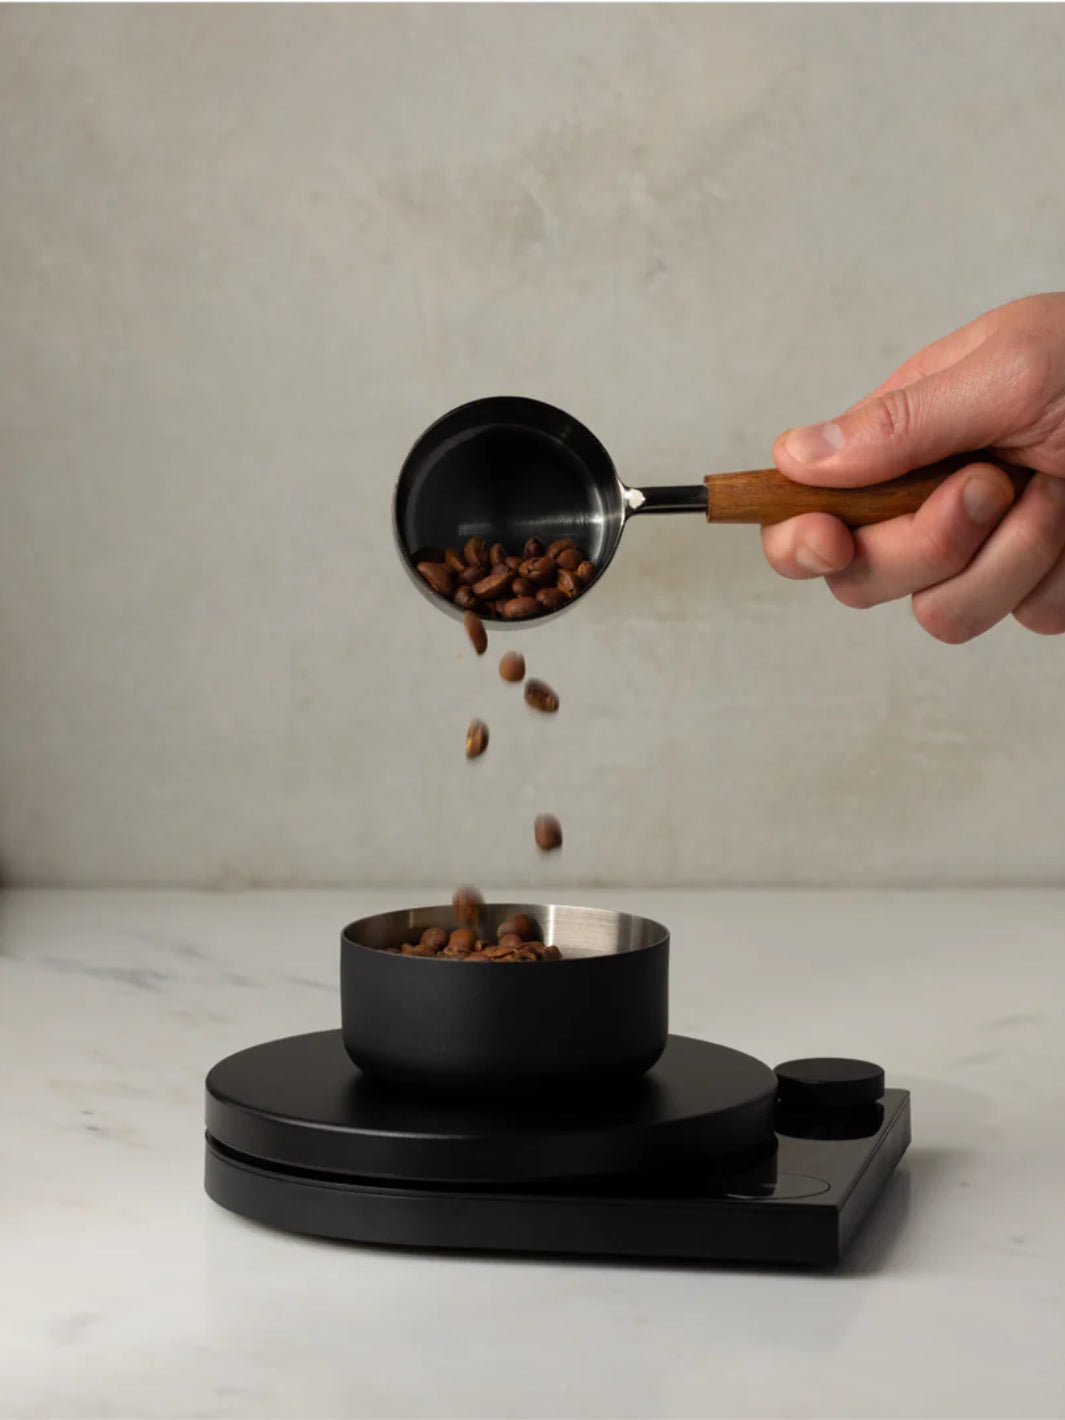 Fellow Tally hands-on: A slick scale for precise pour-overs